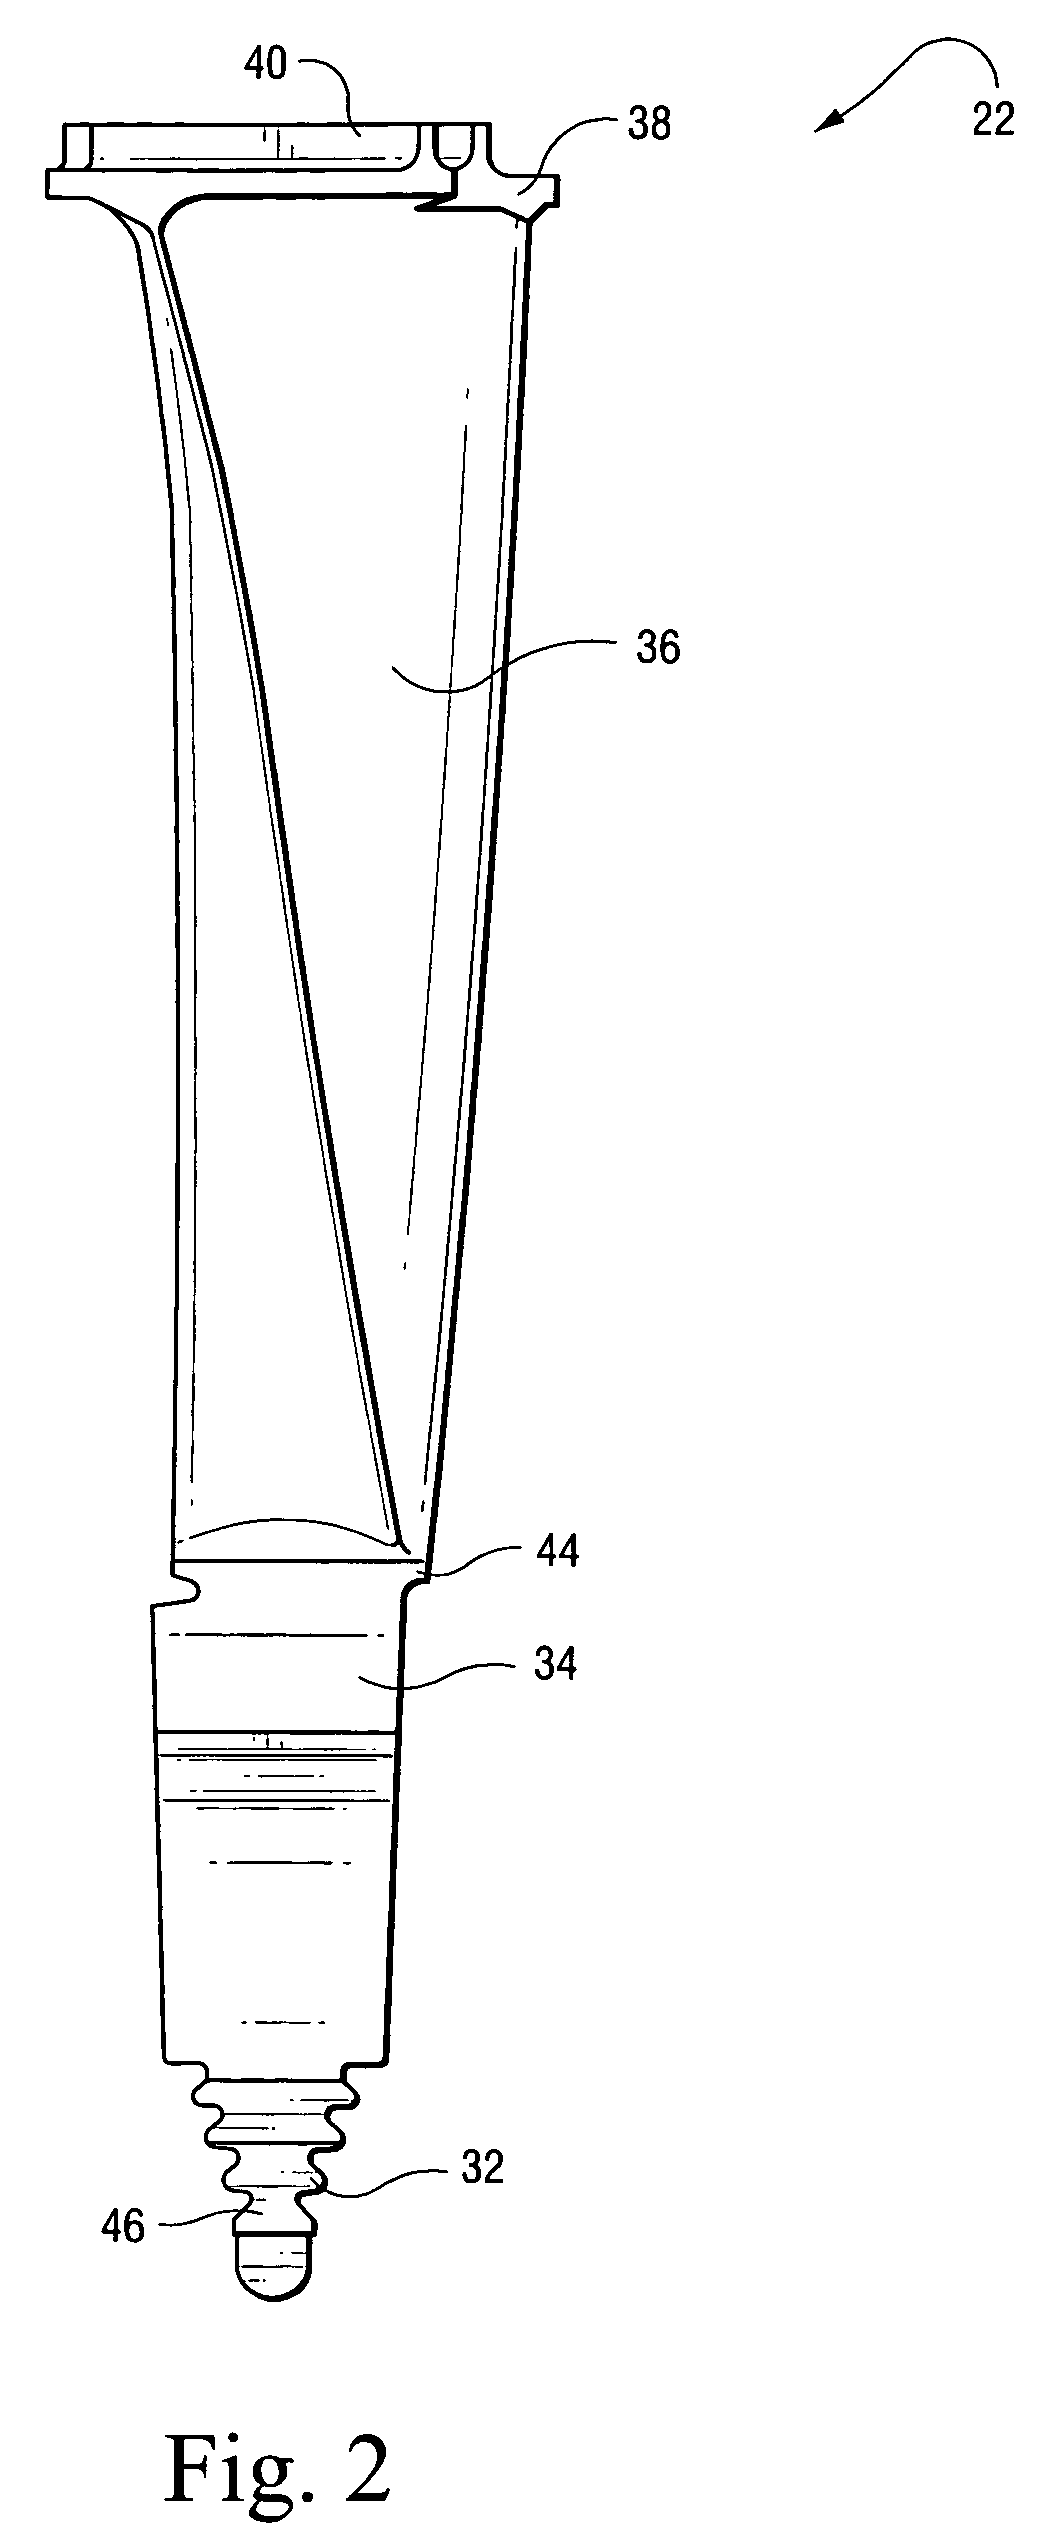 Turbine bucket with optimized cooling circuit